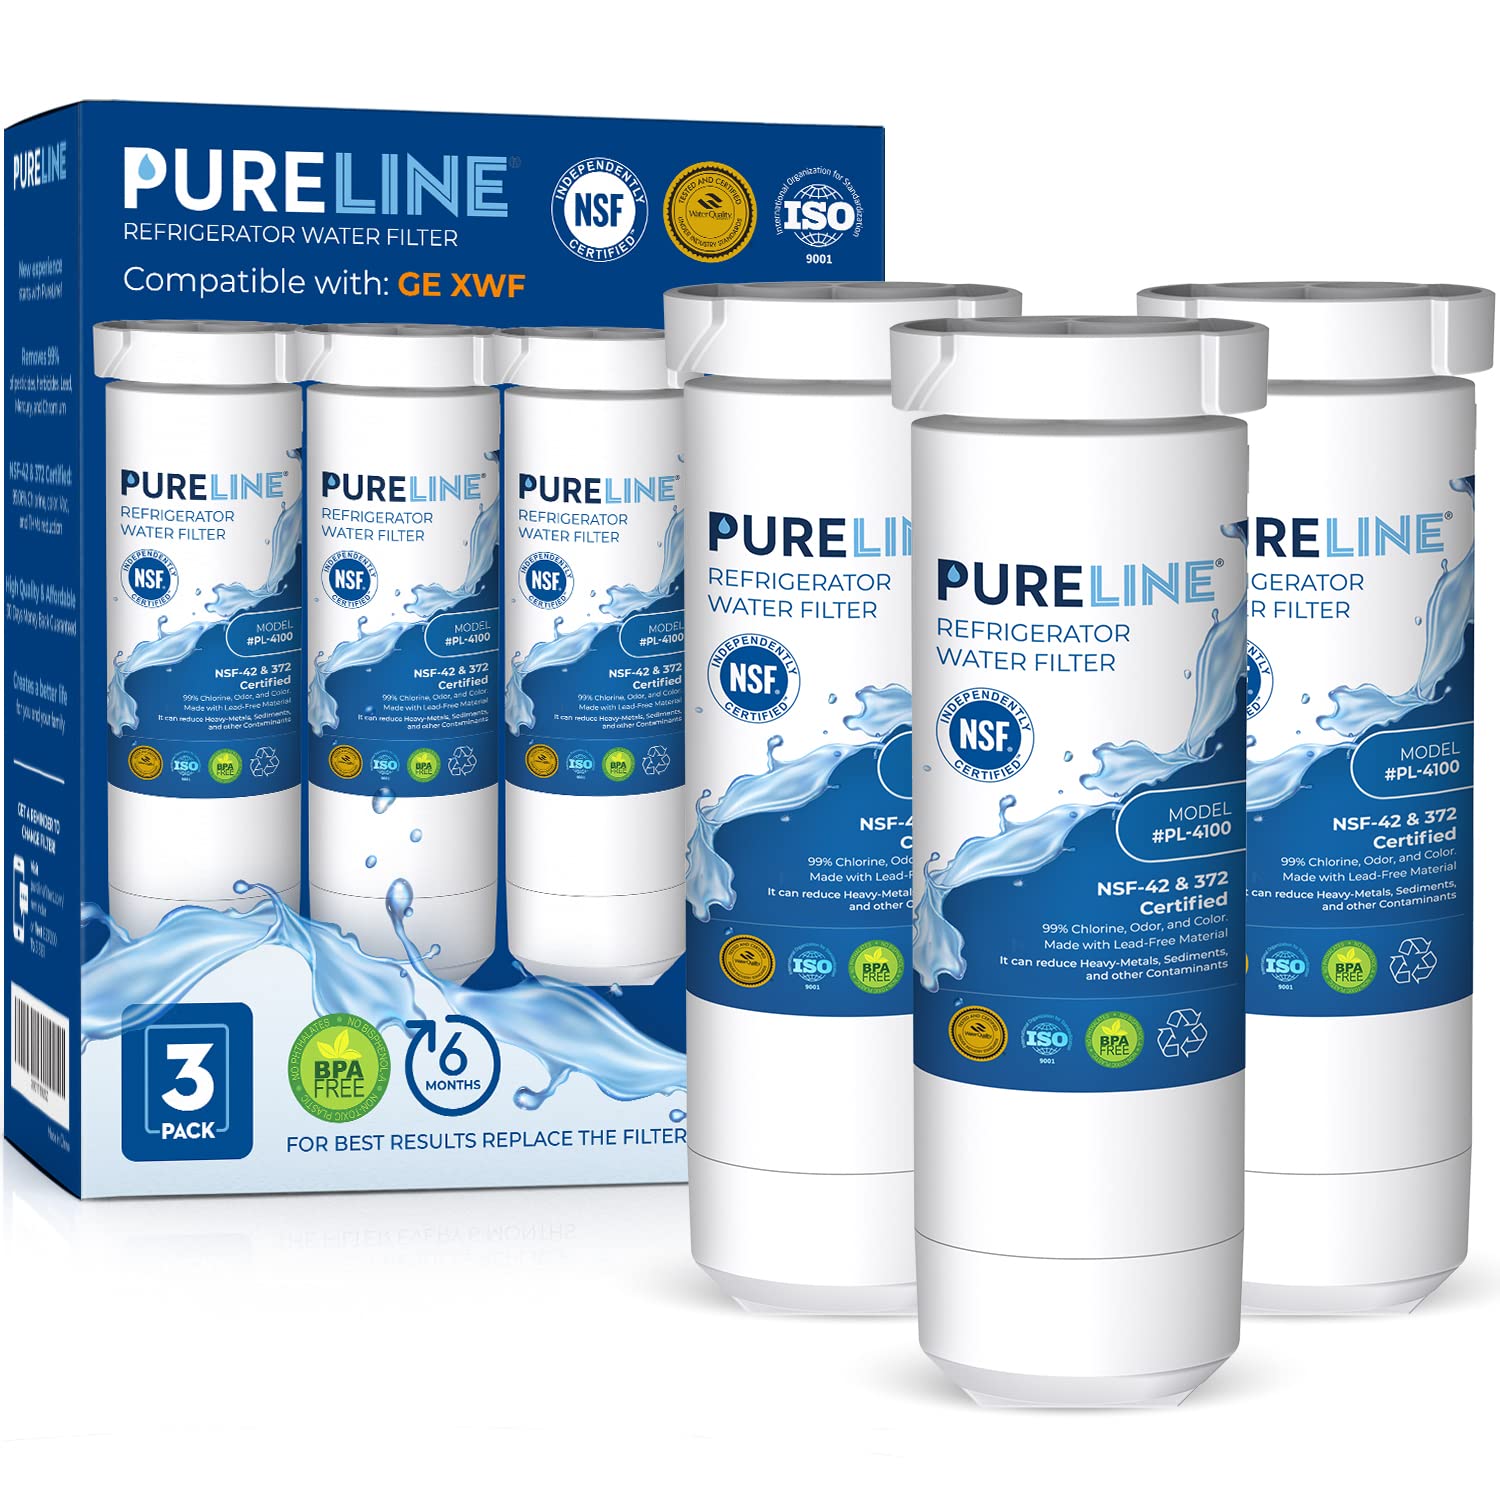 Pureline Xwf Ge Refrigerator Water Filter For Ge Fridge, Xwf Water Filter For Ge Refrigerator Replacement Xwf Water Filter For G